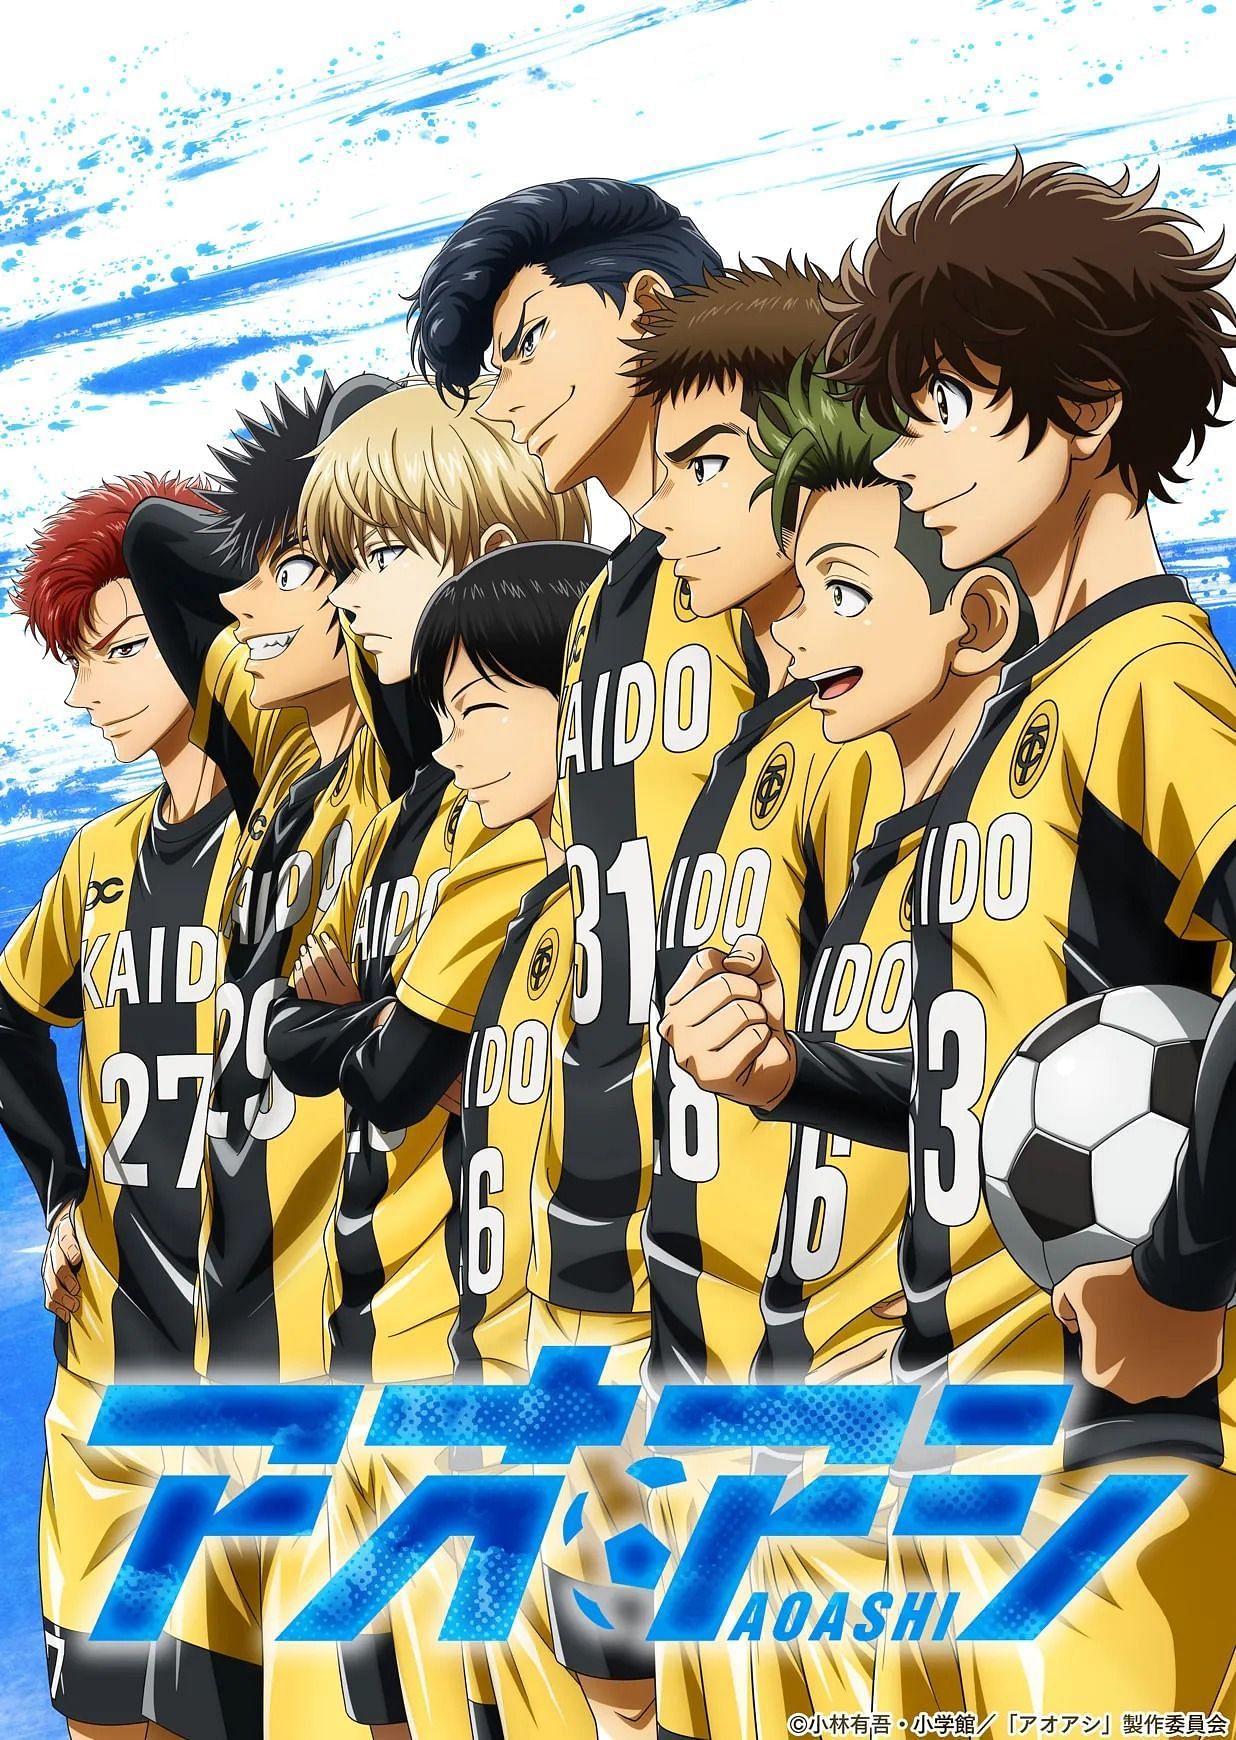 The accompanying visual teaser for Aoashi, with protagonist Ao Ashito on the far right and his presumed Esperion FC teammates on the left. (Image via Production I.G)